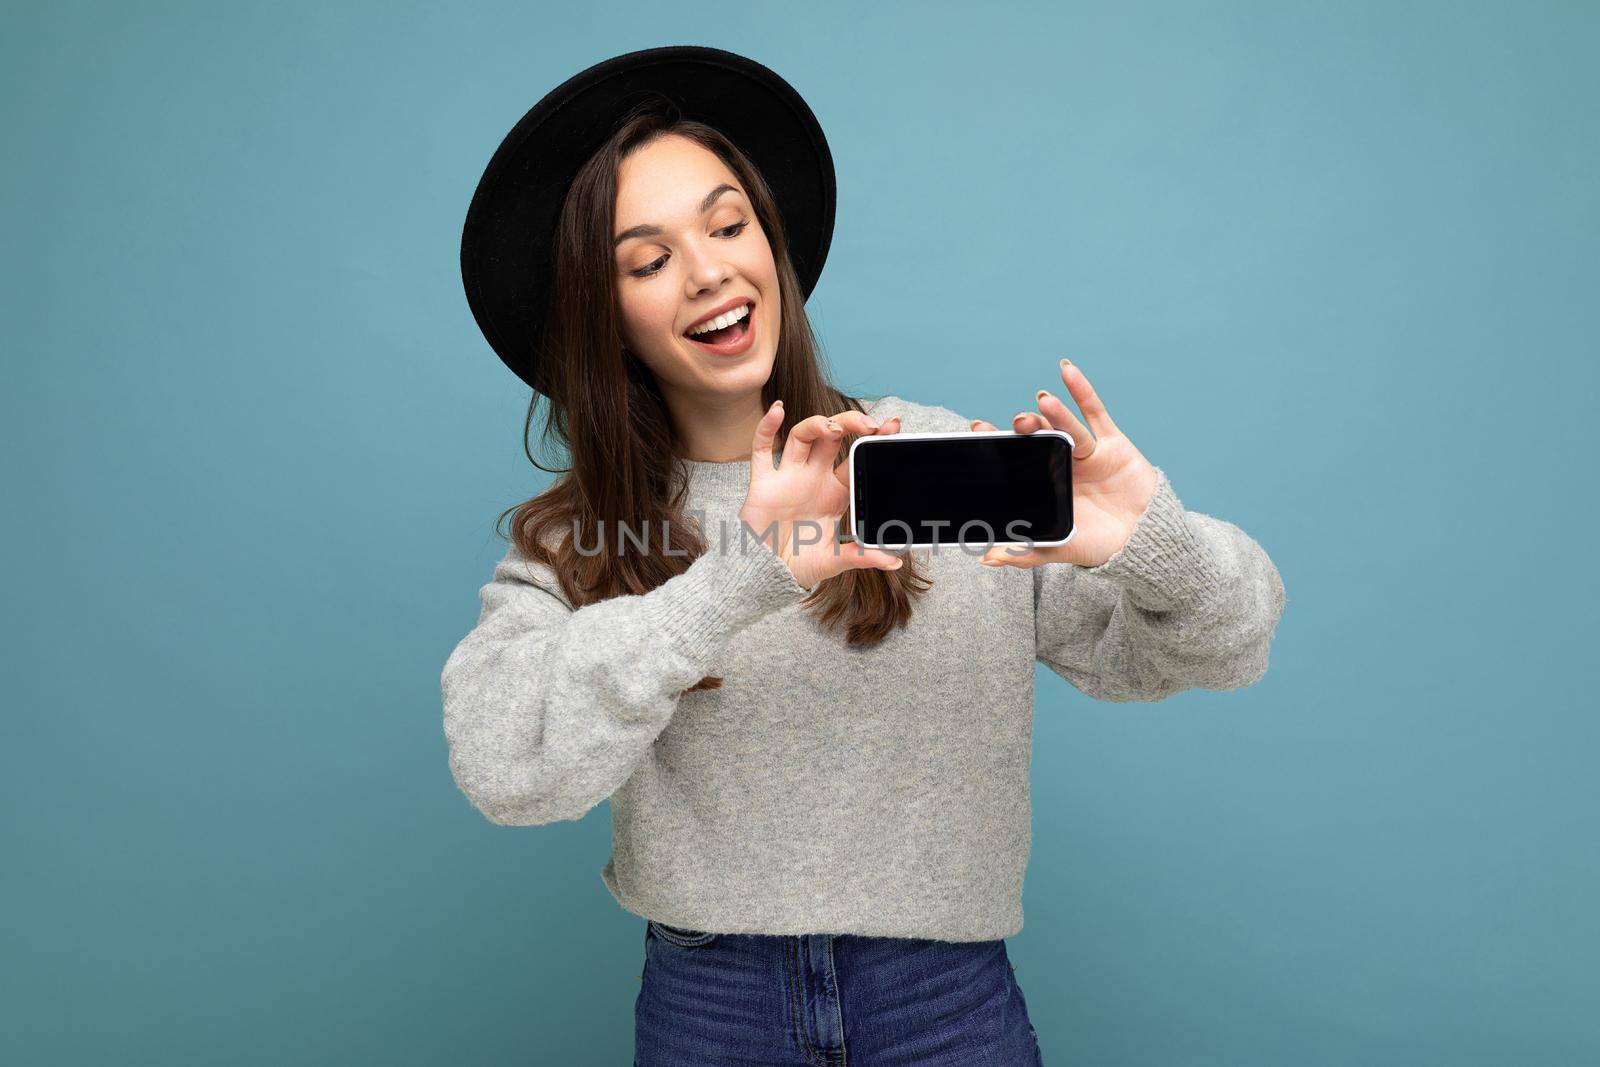 Attractive young smiling woman wearing black hat and grey sweater holding smartphone looking down isolated on background by TRMK